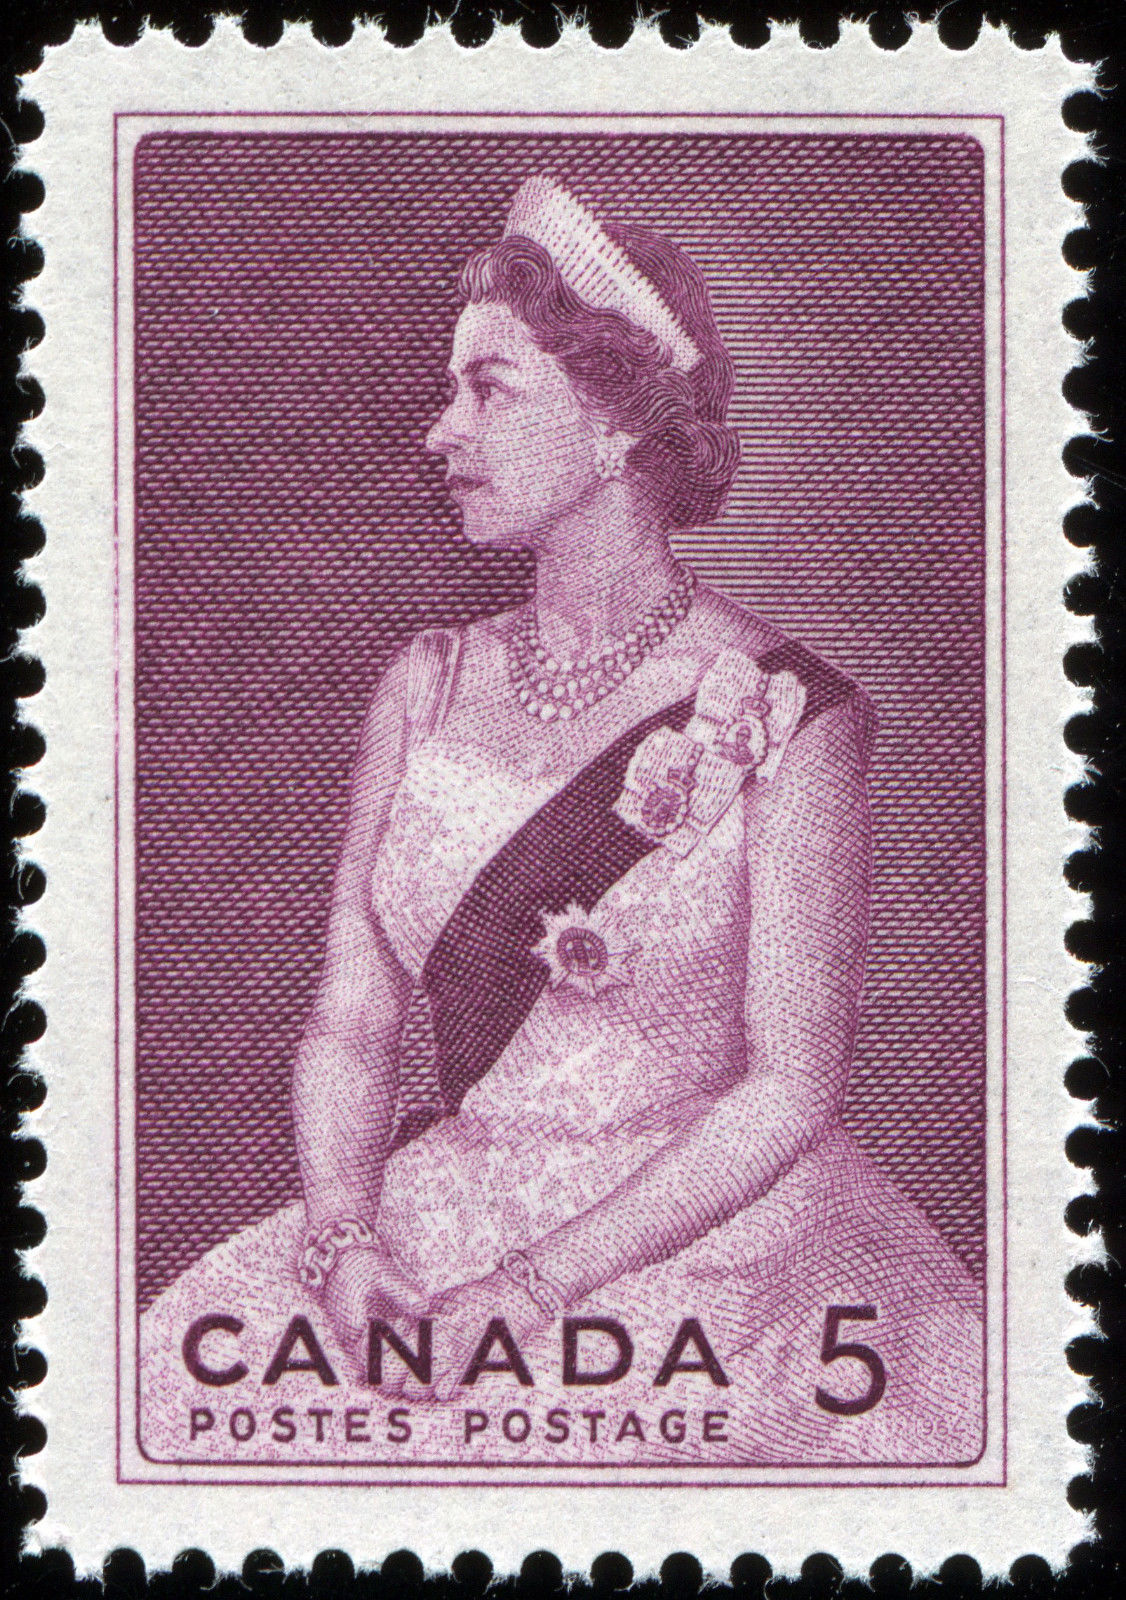 Stampsandcanada Royal Visit 5 Cents 1964 Stamps Of Canada Price Guide And Value